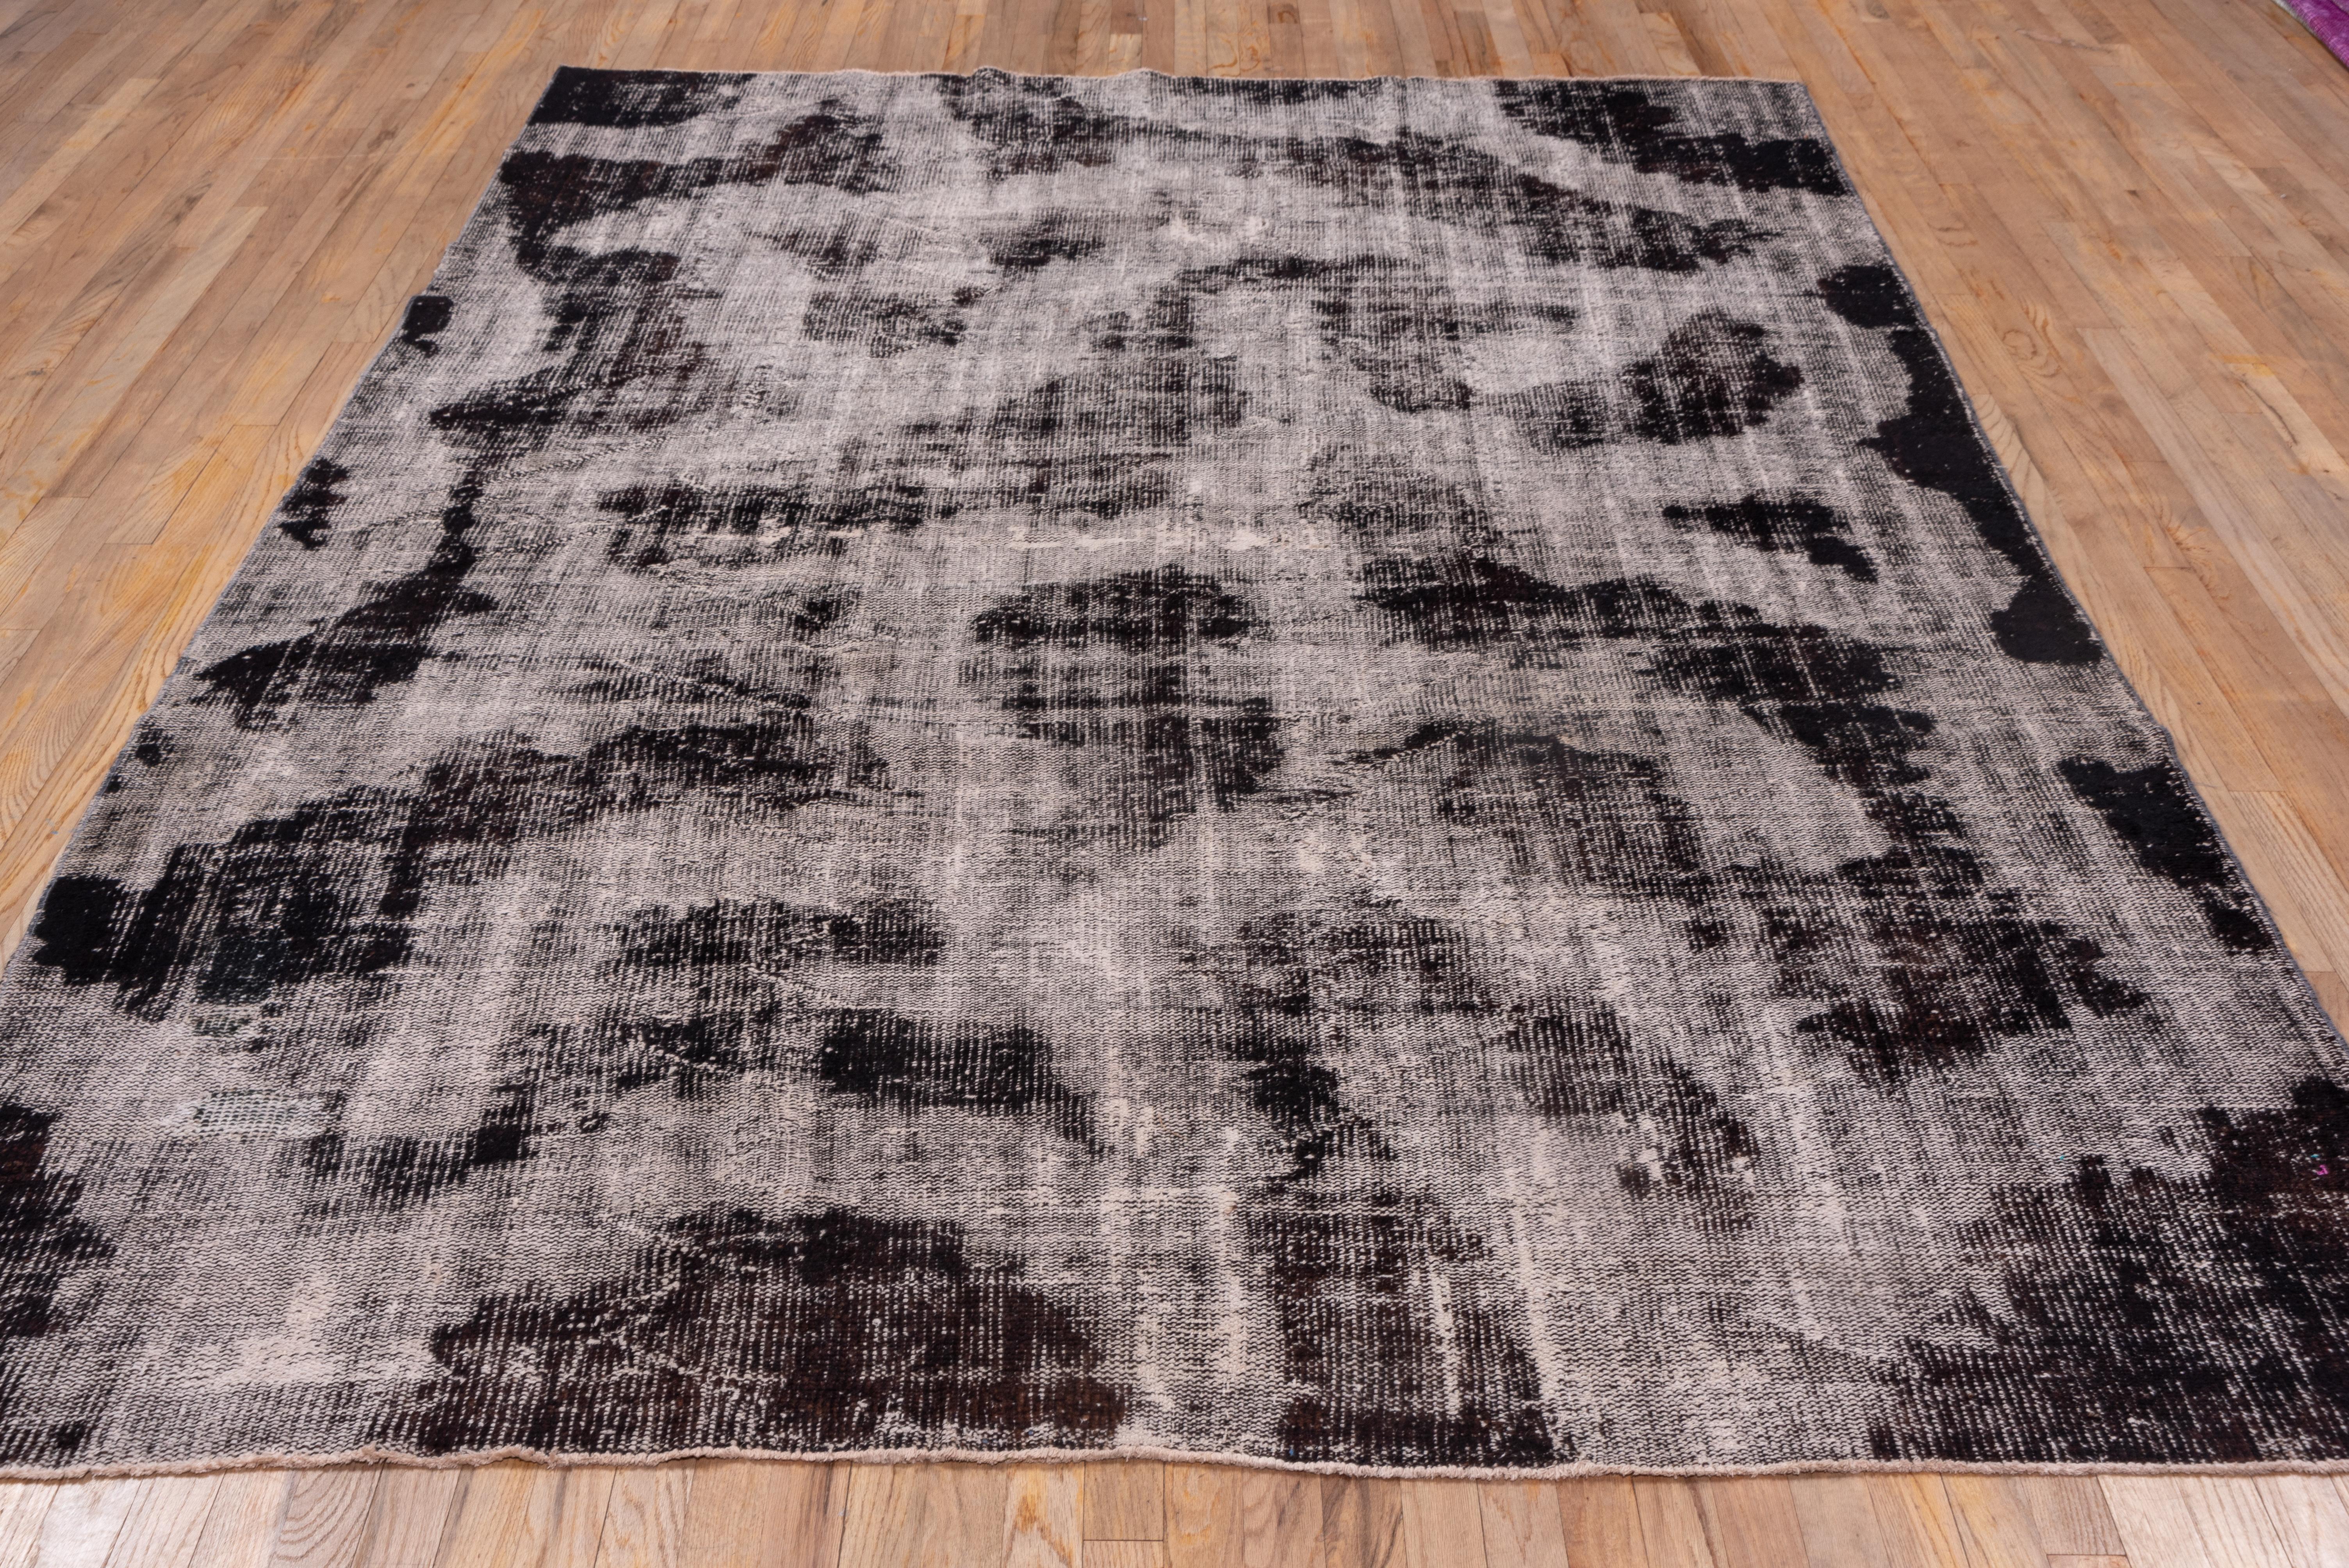 Turkish Black and White Distressed Overdyed Carpet